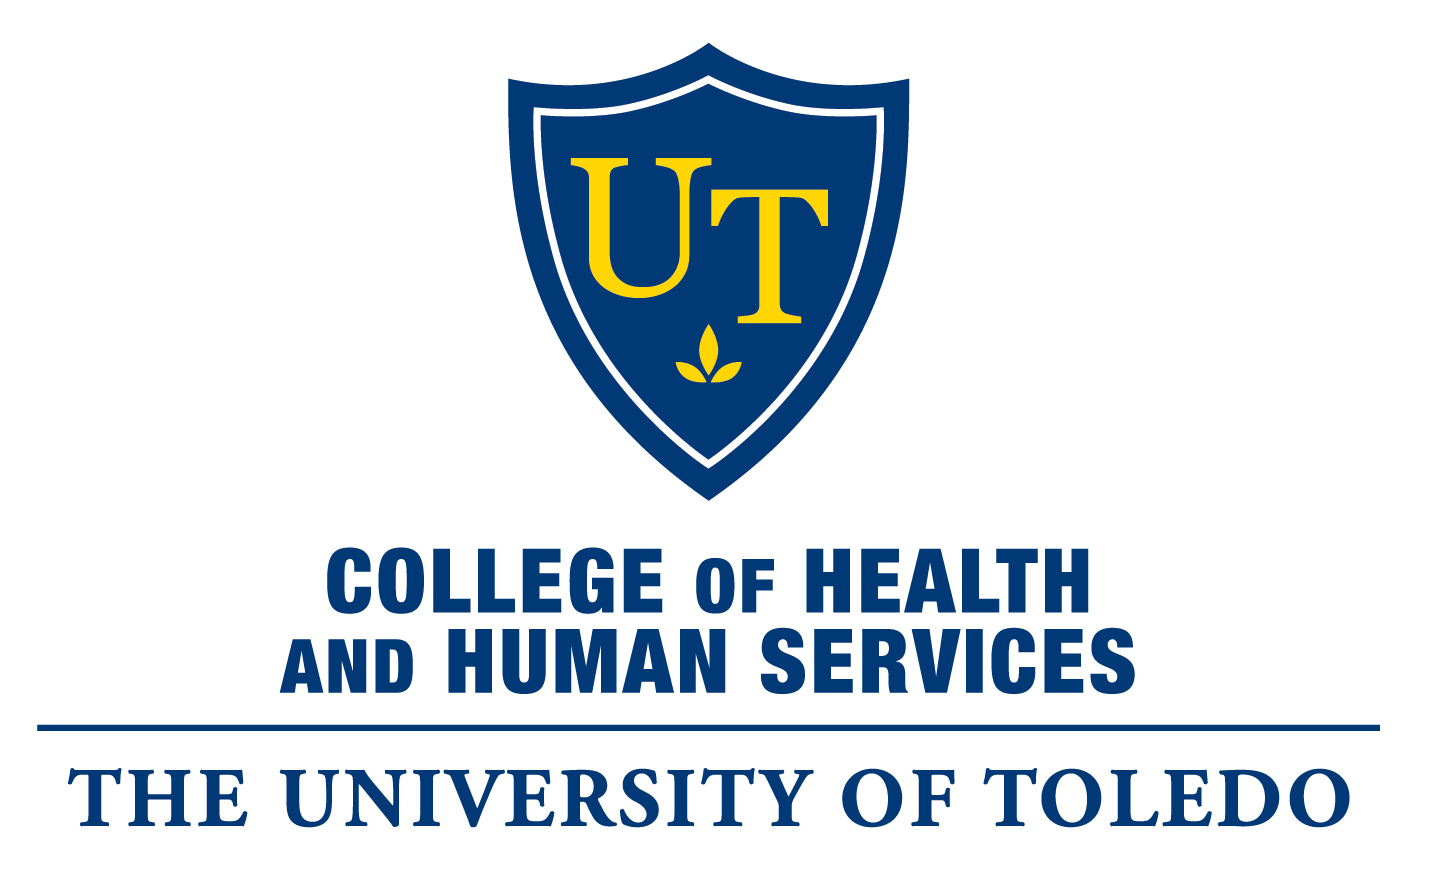 College of Health and Human Services logo